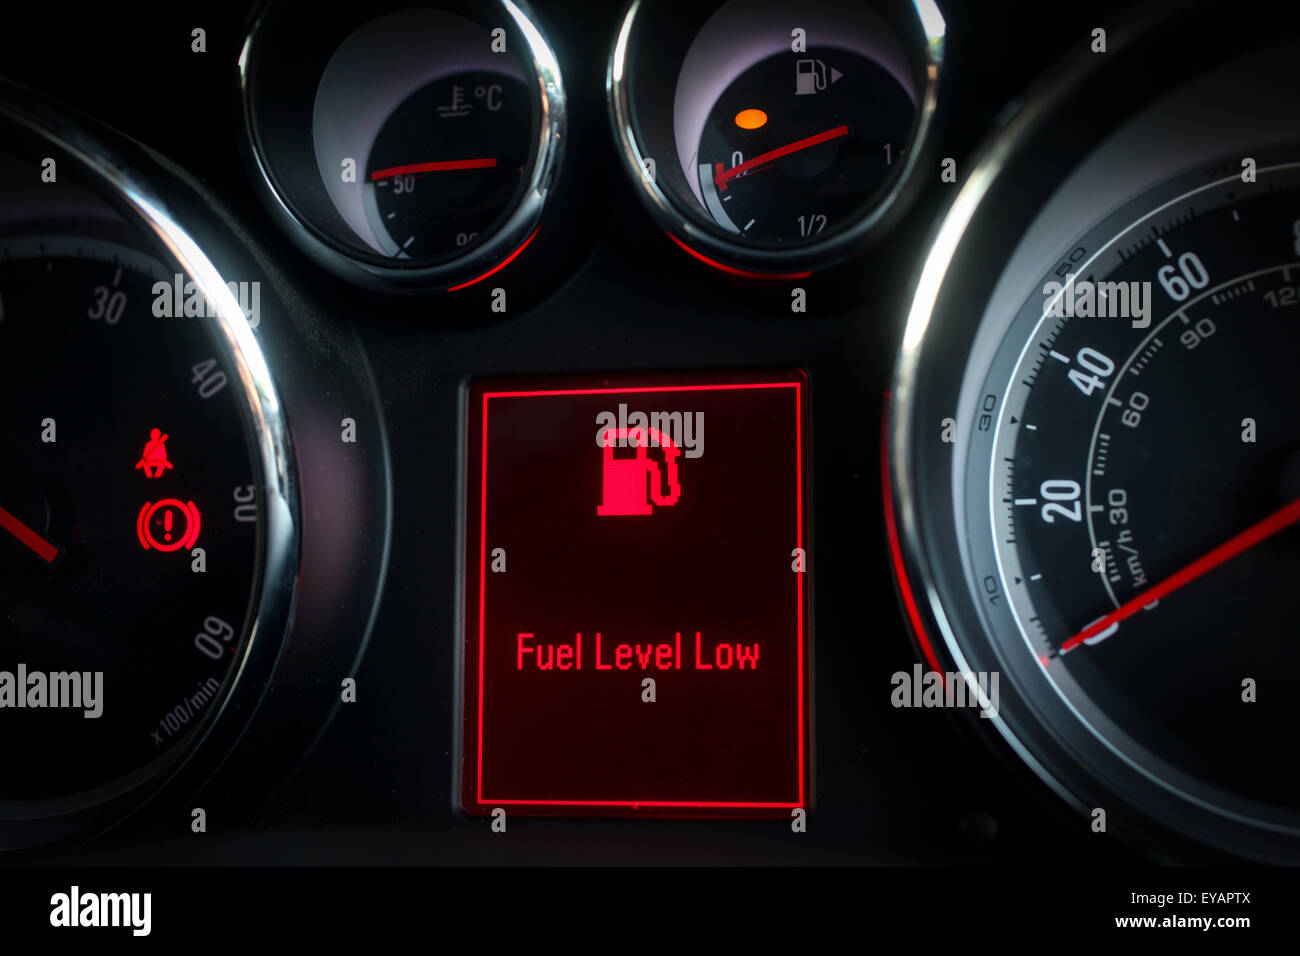 Low fuel warning light displayed on a car dashboard Stock Photo